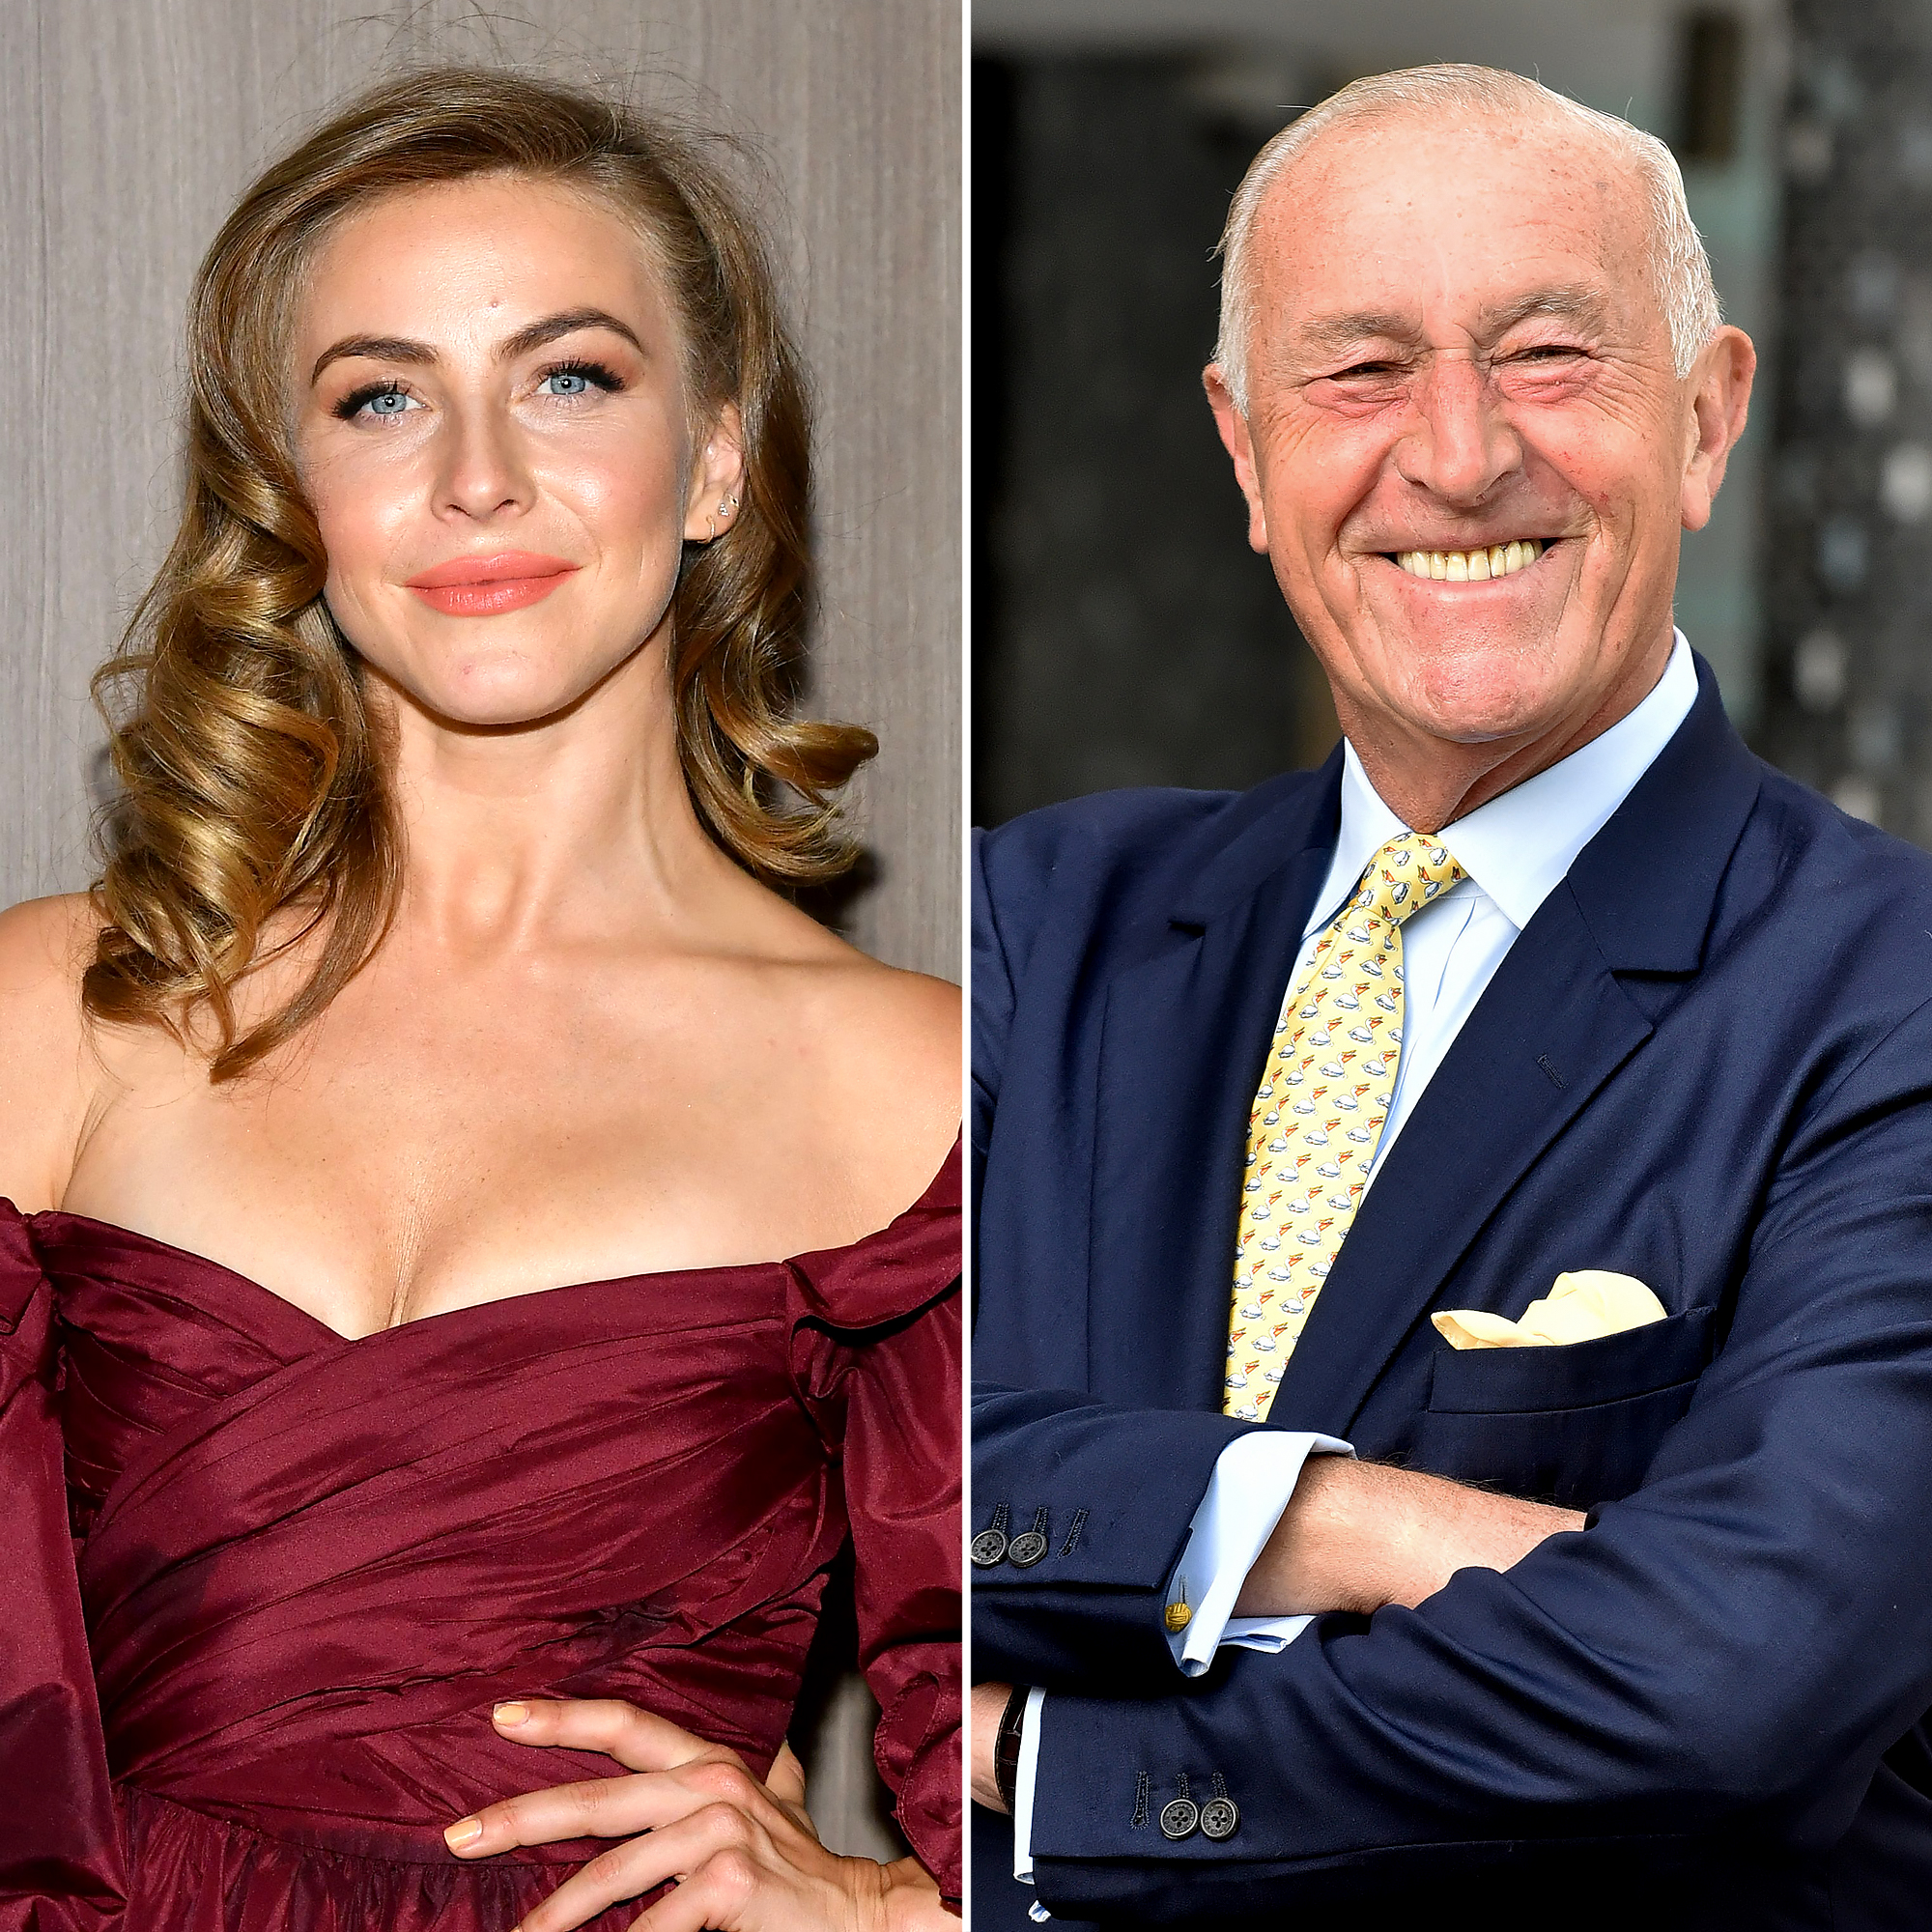 Julianne Hough Says Len Goodman Is Still 'The Heart' of 'DWTS' Over 5 Months After His Death